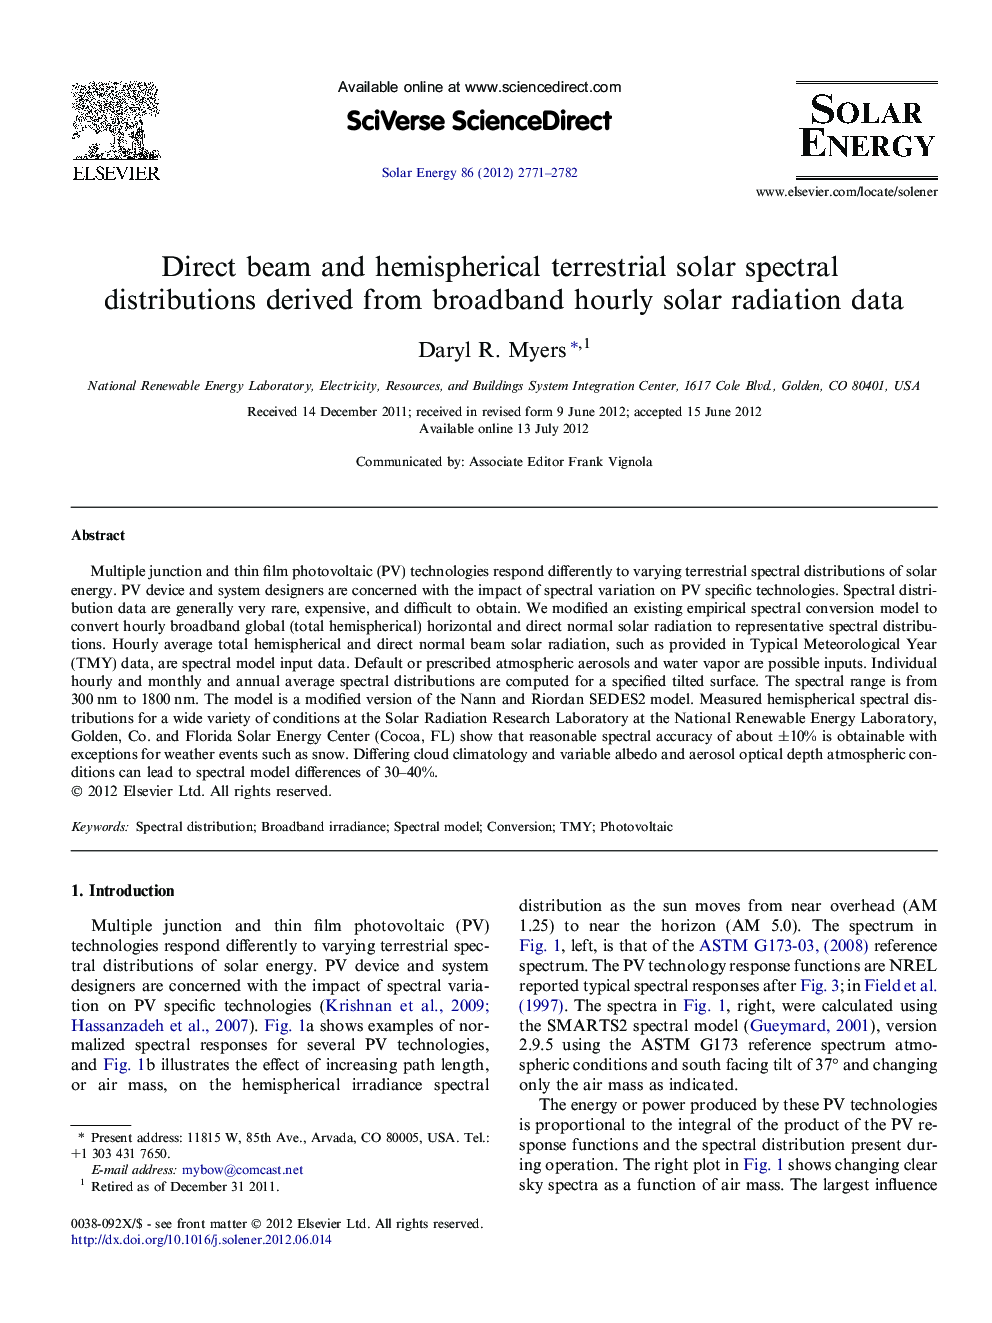 Direct beam and hemispherical terrestrial solar spectral distributions derived from broadband hourly solar radiation data